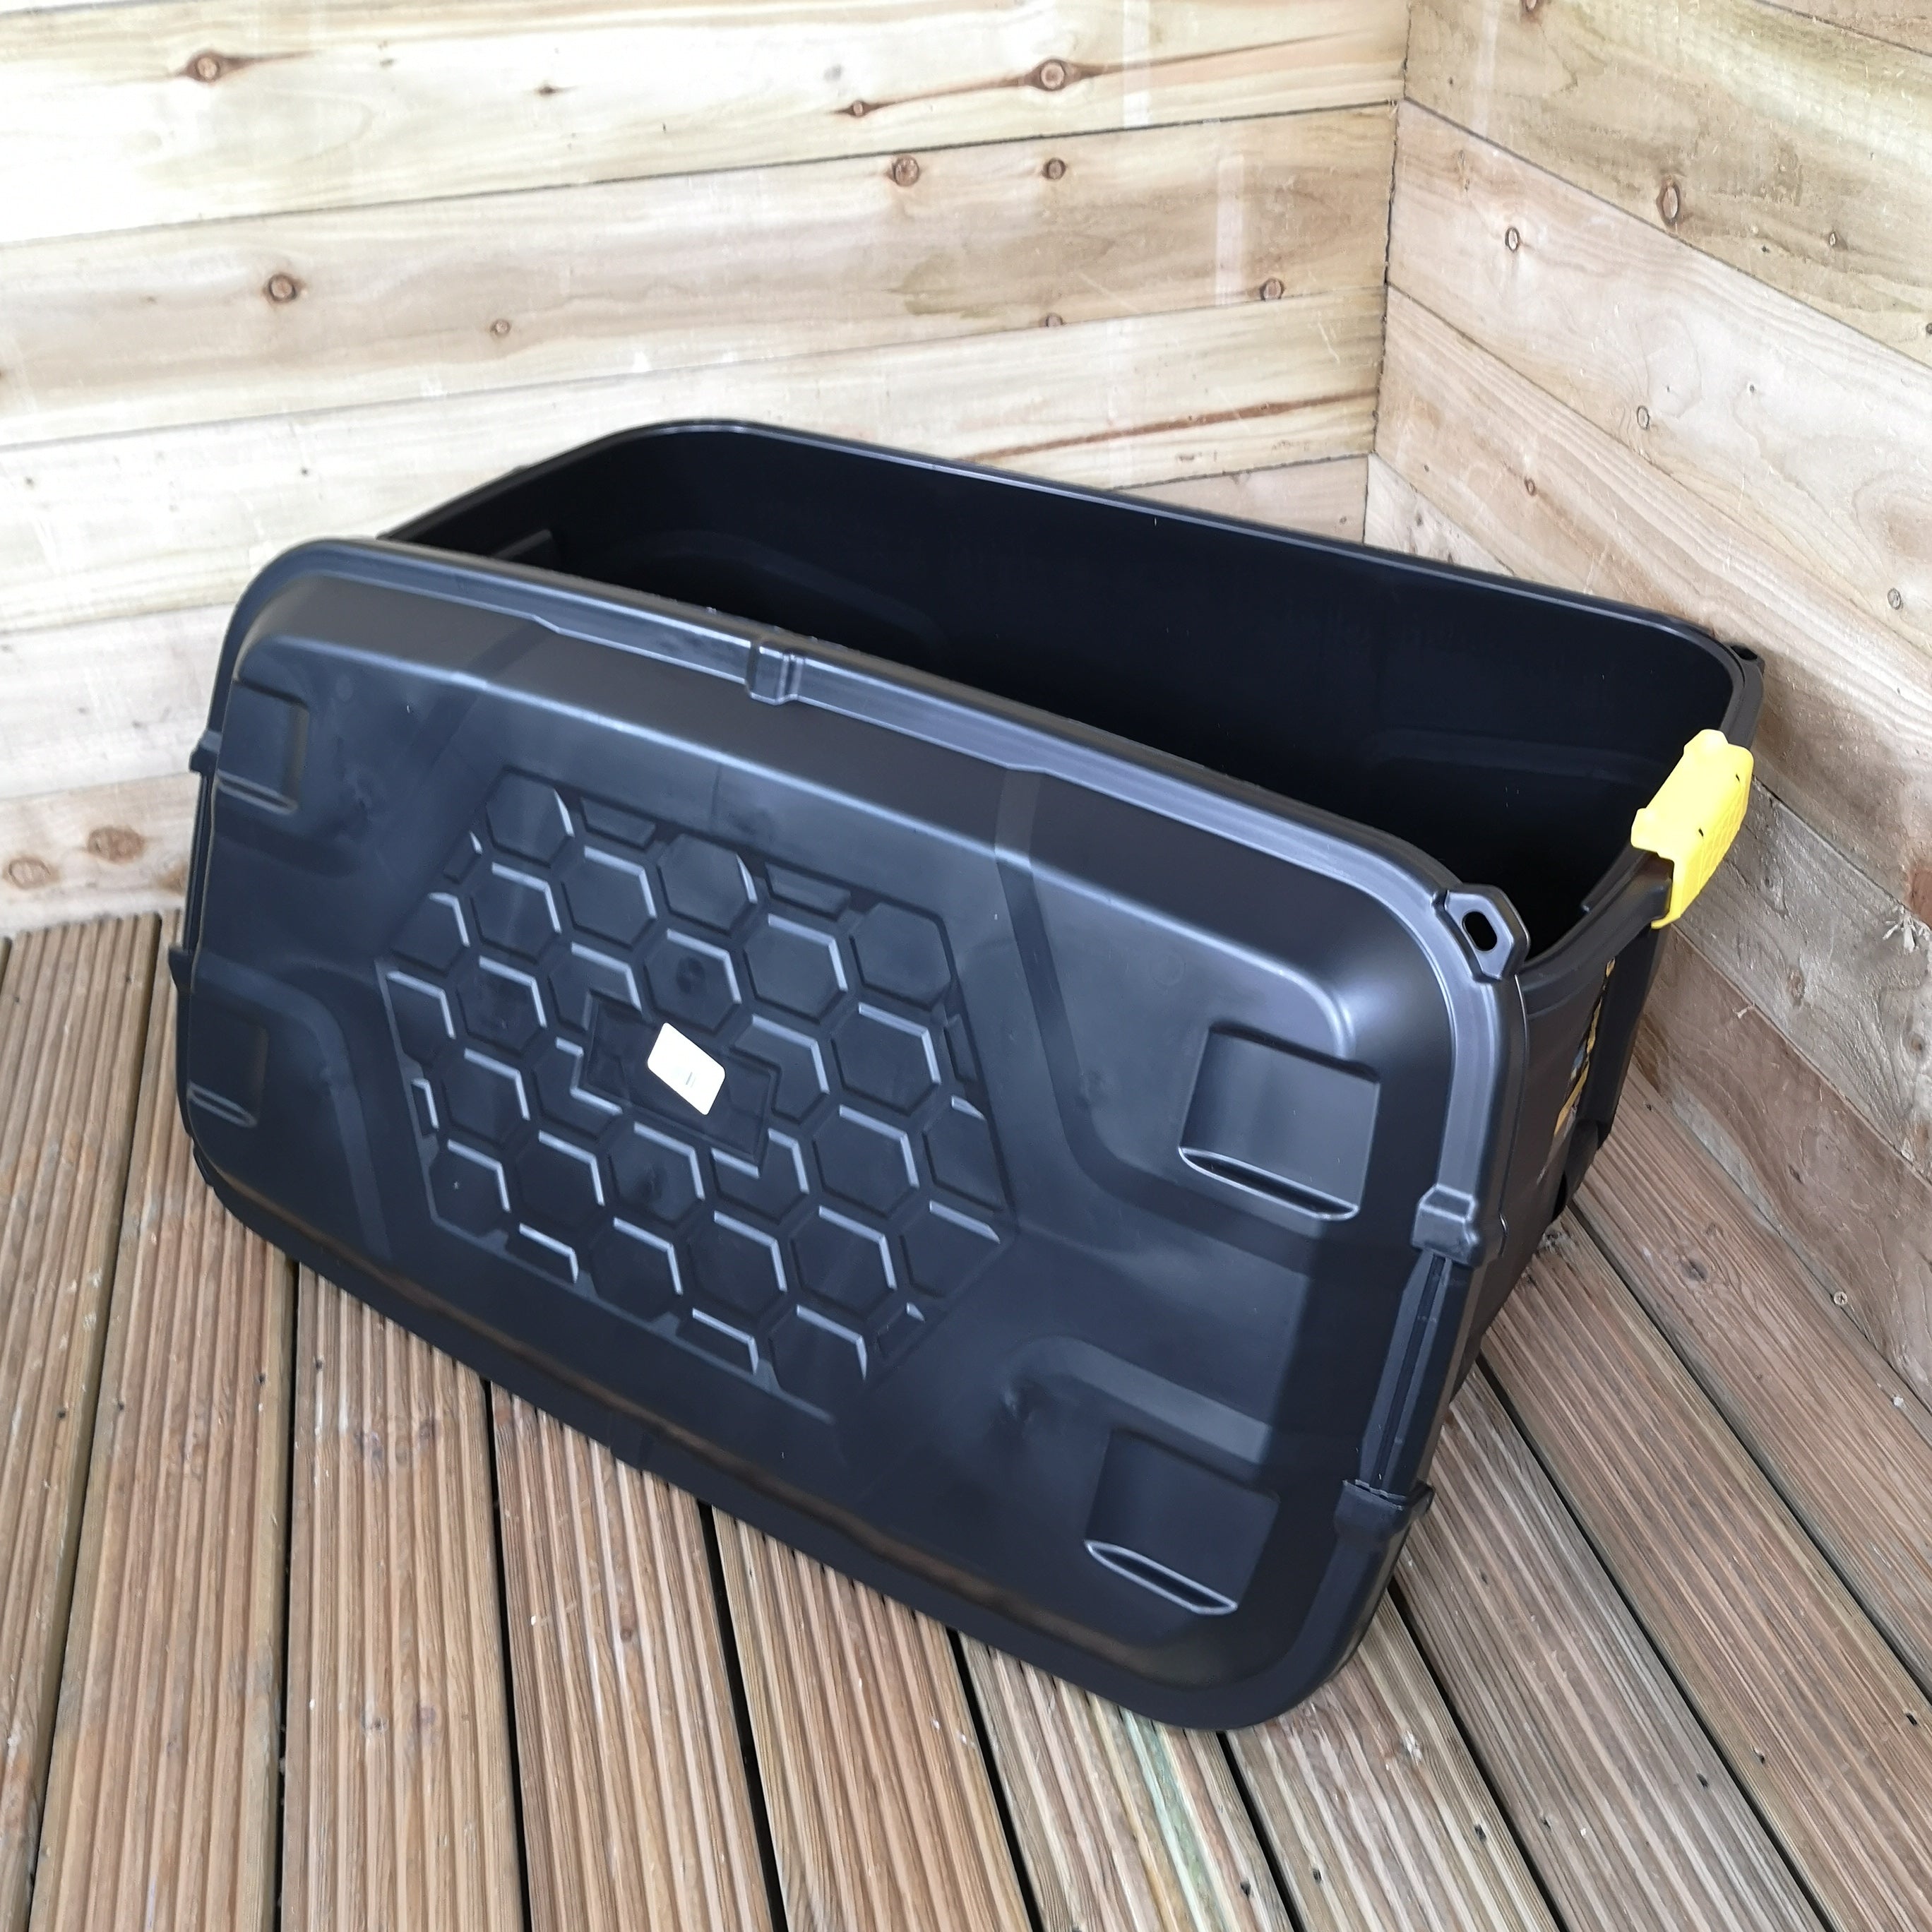 1 x 145L AND 1 x 75L Heavy Duty Trunks on Wheels Sturdy, Lockable, Stackable and Nestable Design Storage Chest with Clips in Black